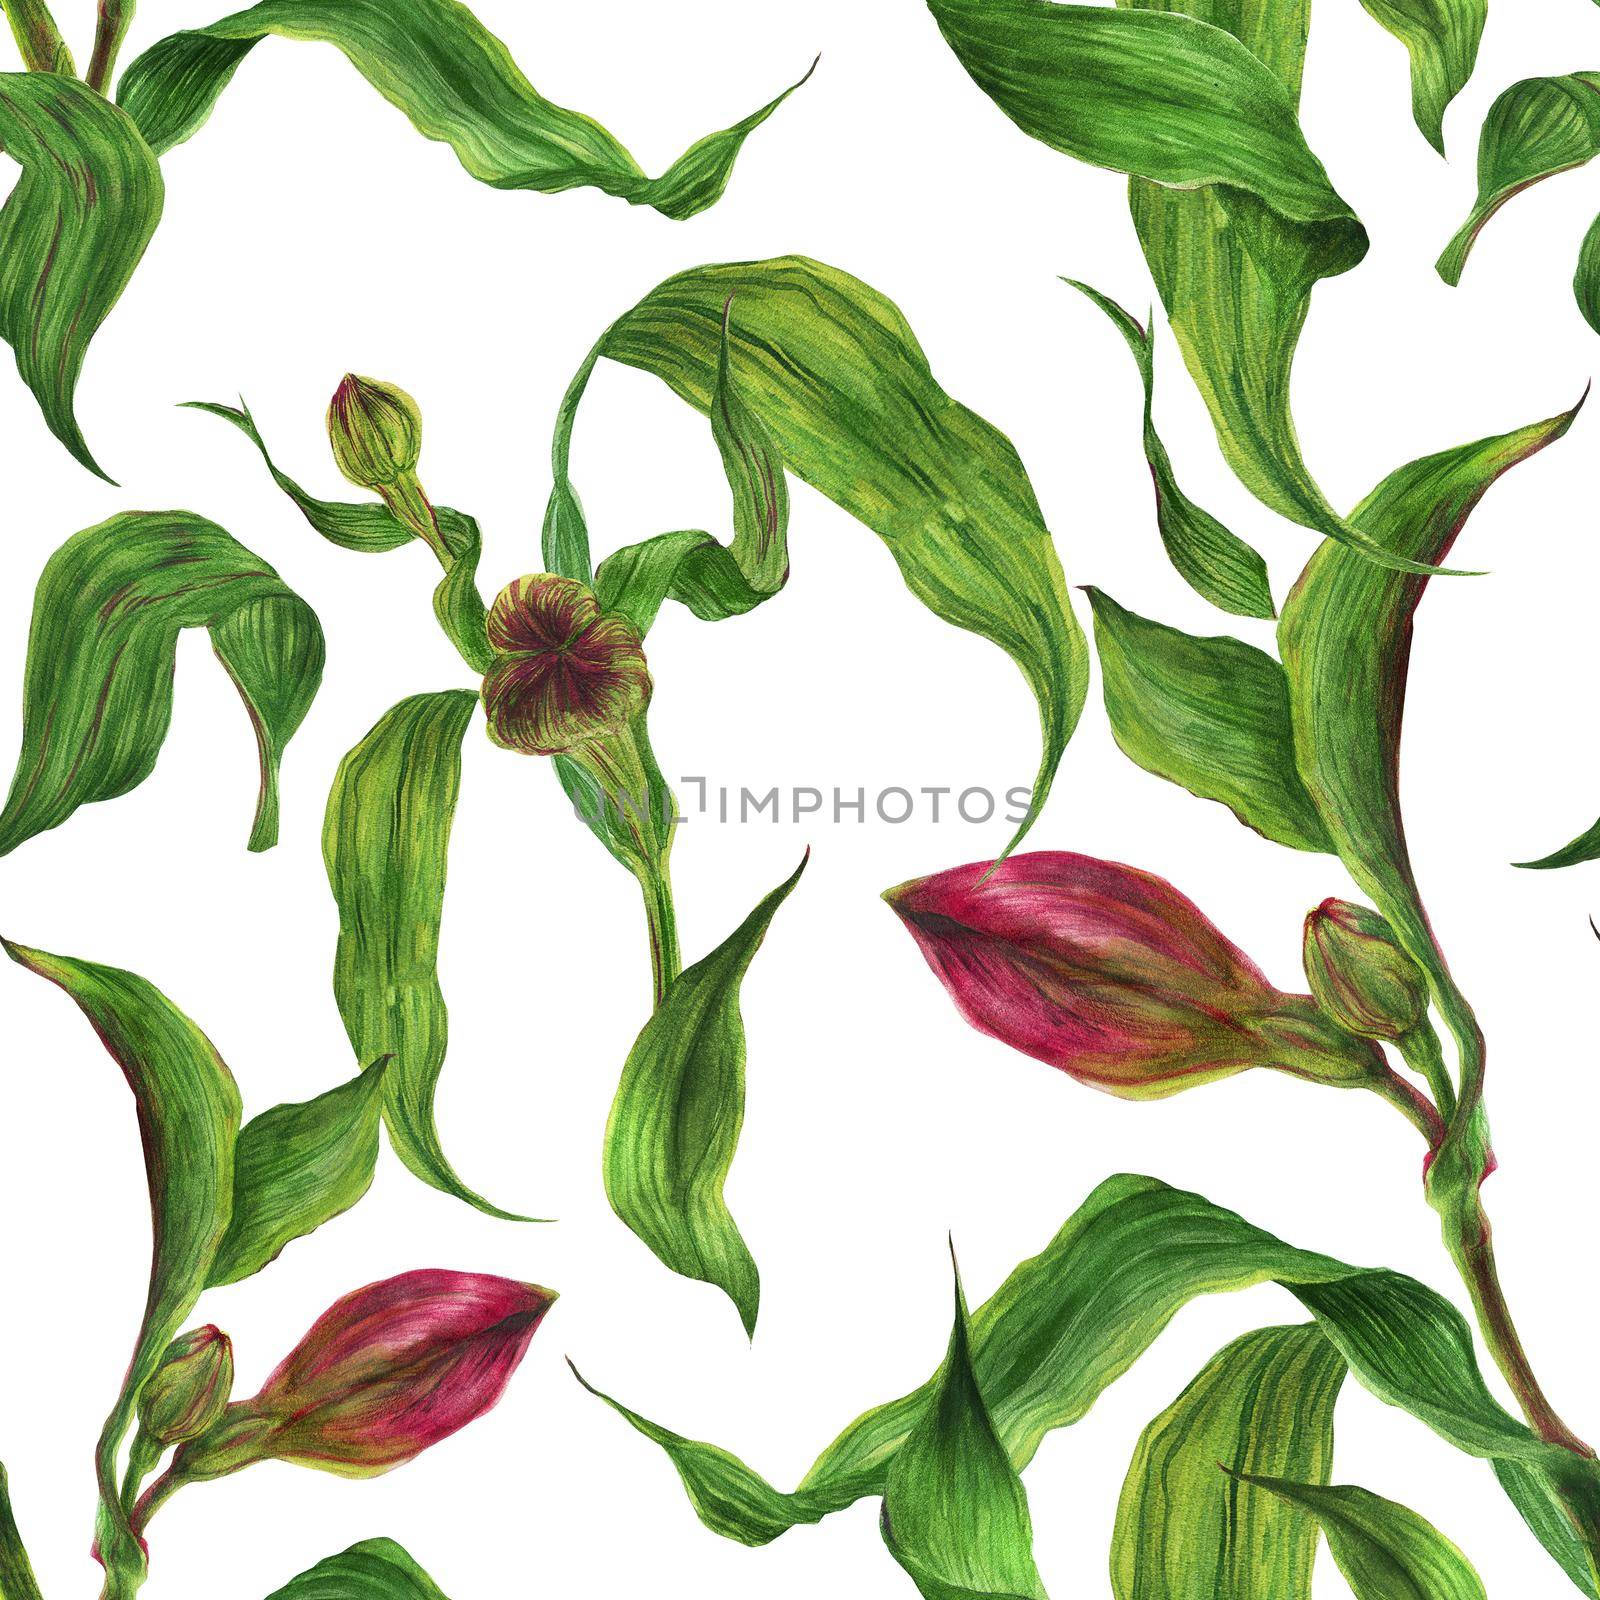 Watercolor bright seamless pattern with red alstroemeria buds and leaves by Xeniasnowstorm